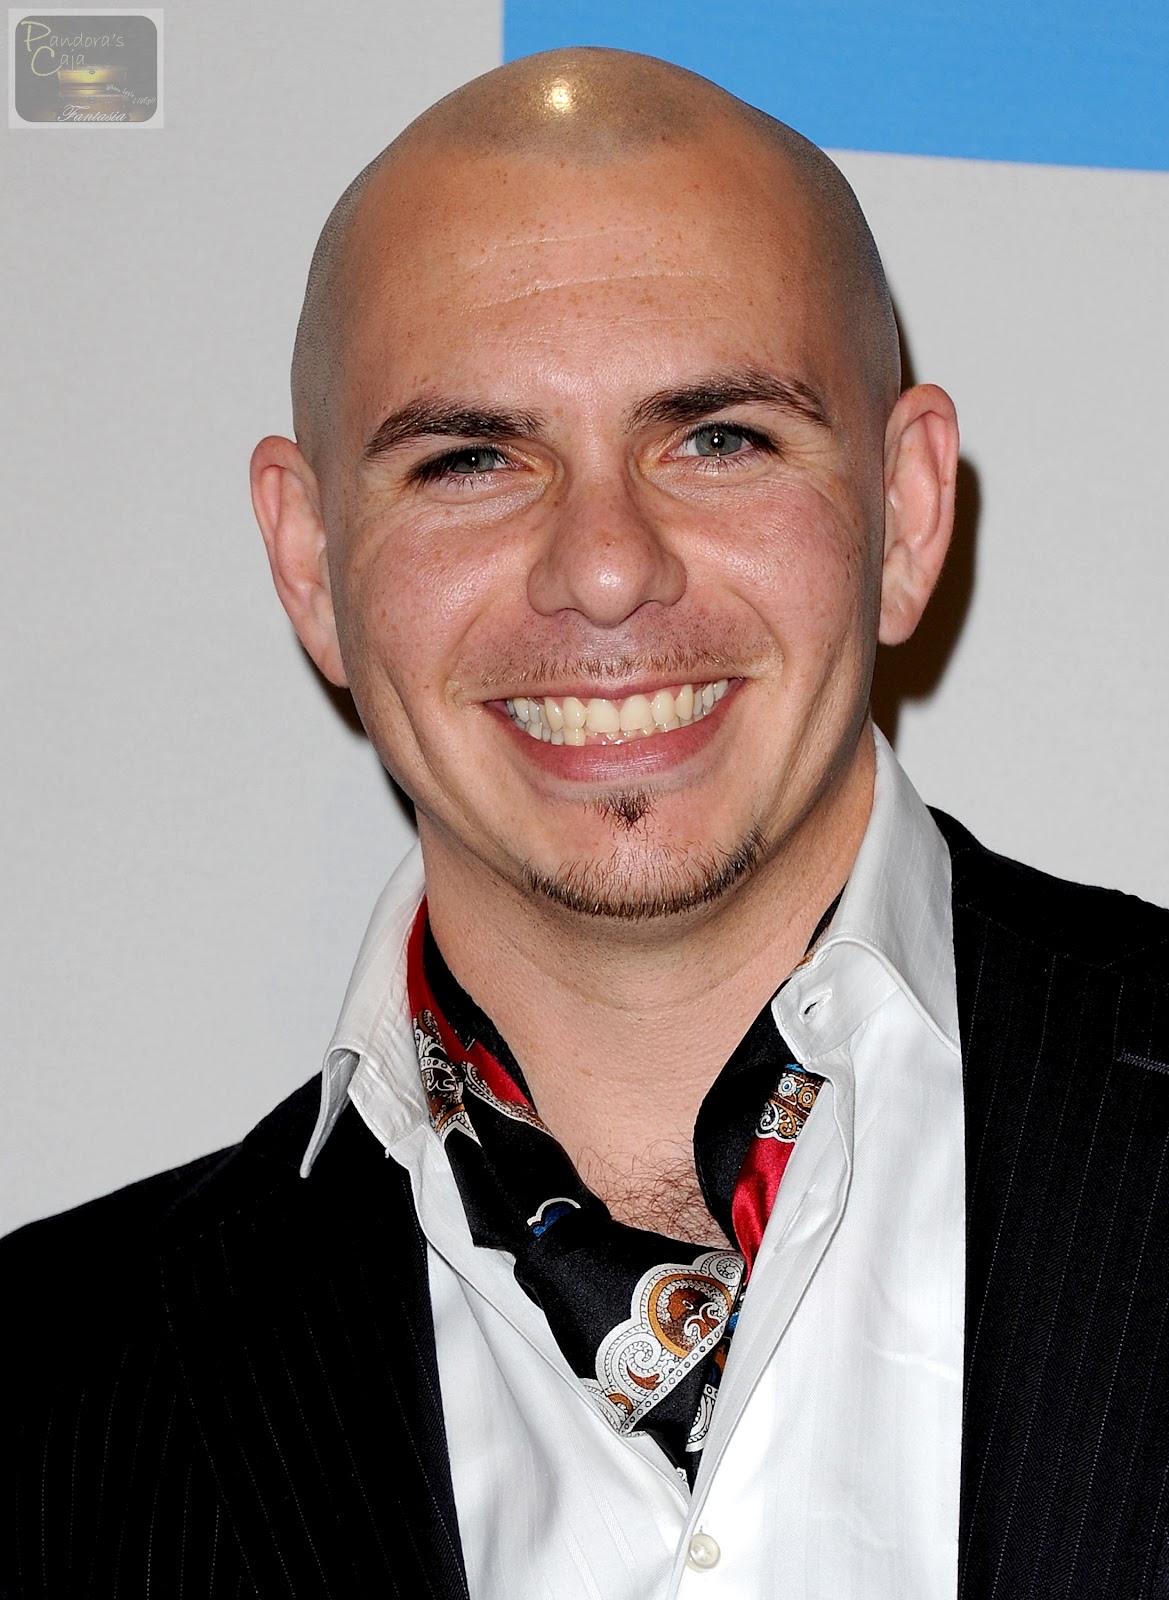 Pitbull Rapper Wallpapers Pictures Hd Wallpapers